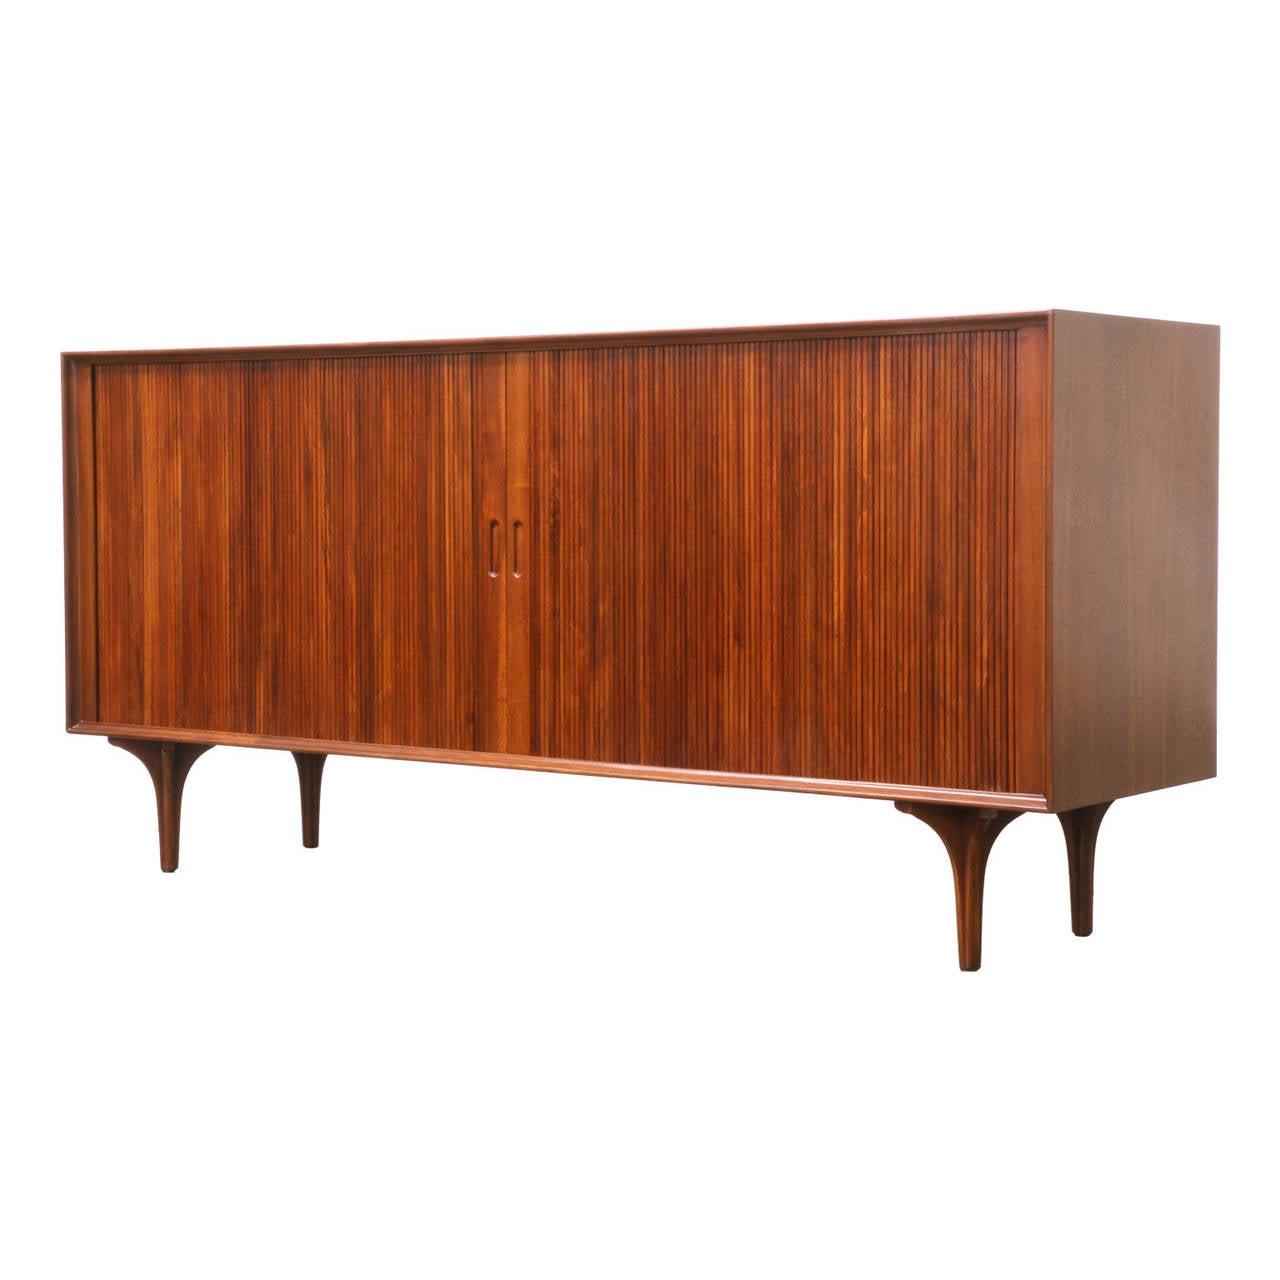 Designer: Milo Baughman
Manufacturer: Glenn of California
Period/Style: Mid Century Modern
Country: United States
Date: 1950’s

Dimensions: 30.5″H x 64.75″L x 18″W
Materials: Walnut
Condition: Excellent – Newly Refinished
Number of Items: